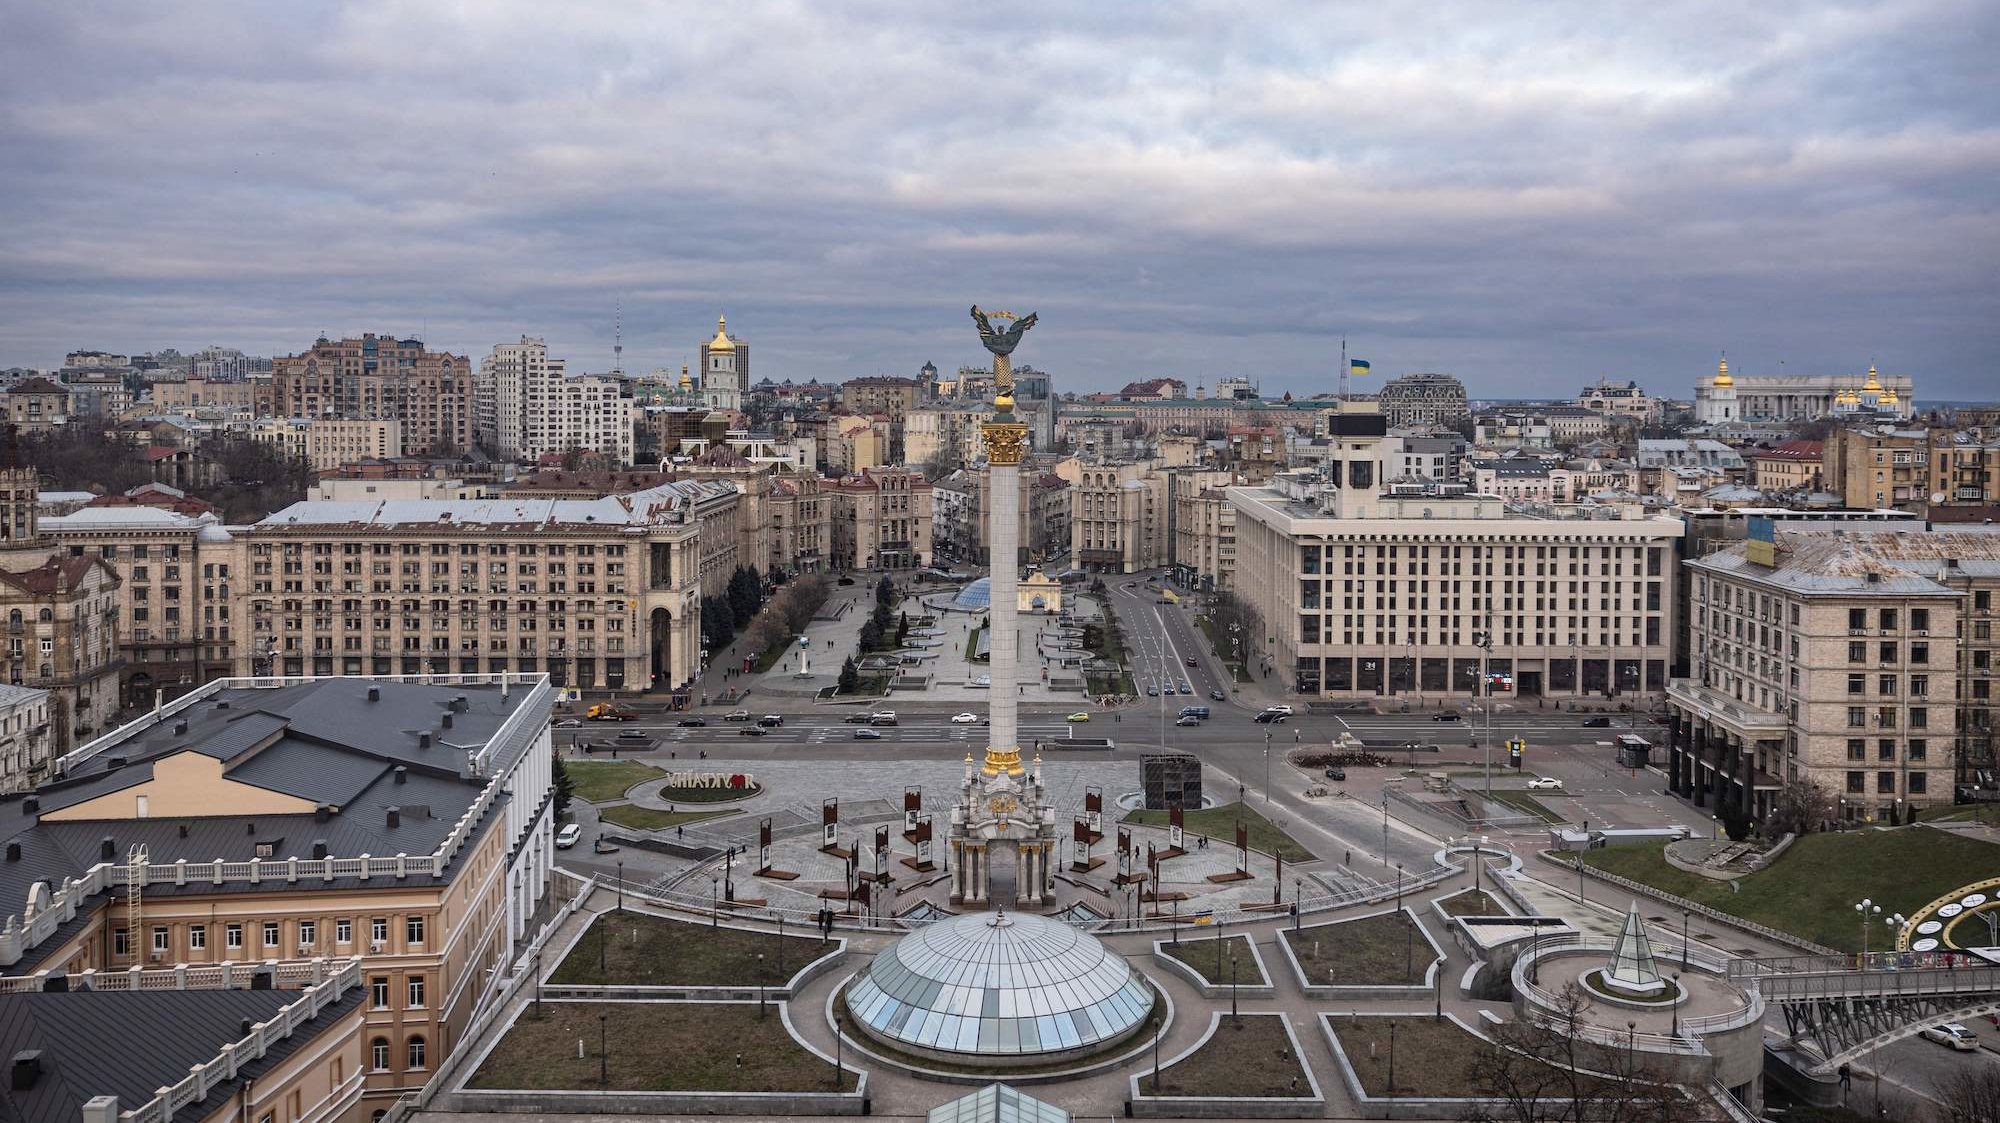 This photograph shows a general view of the Maidan square and the skyline of the Ukrainian capital ...